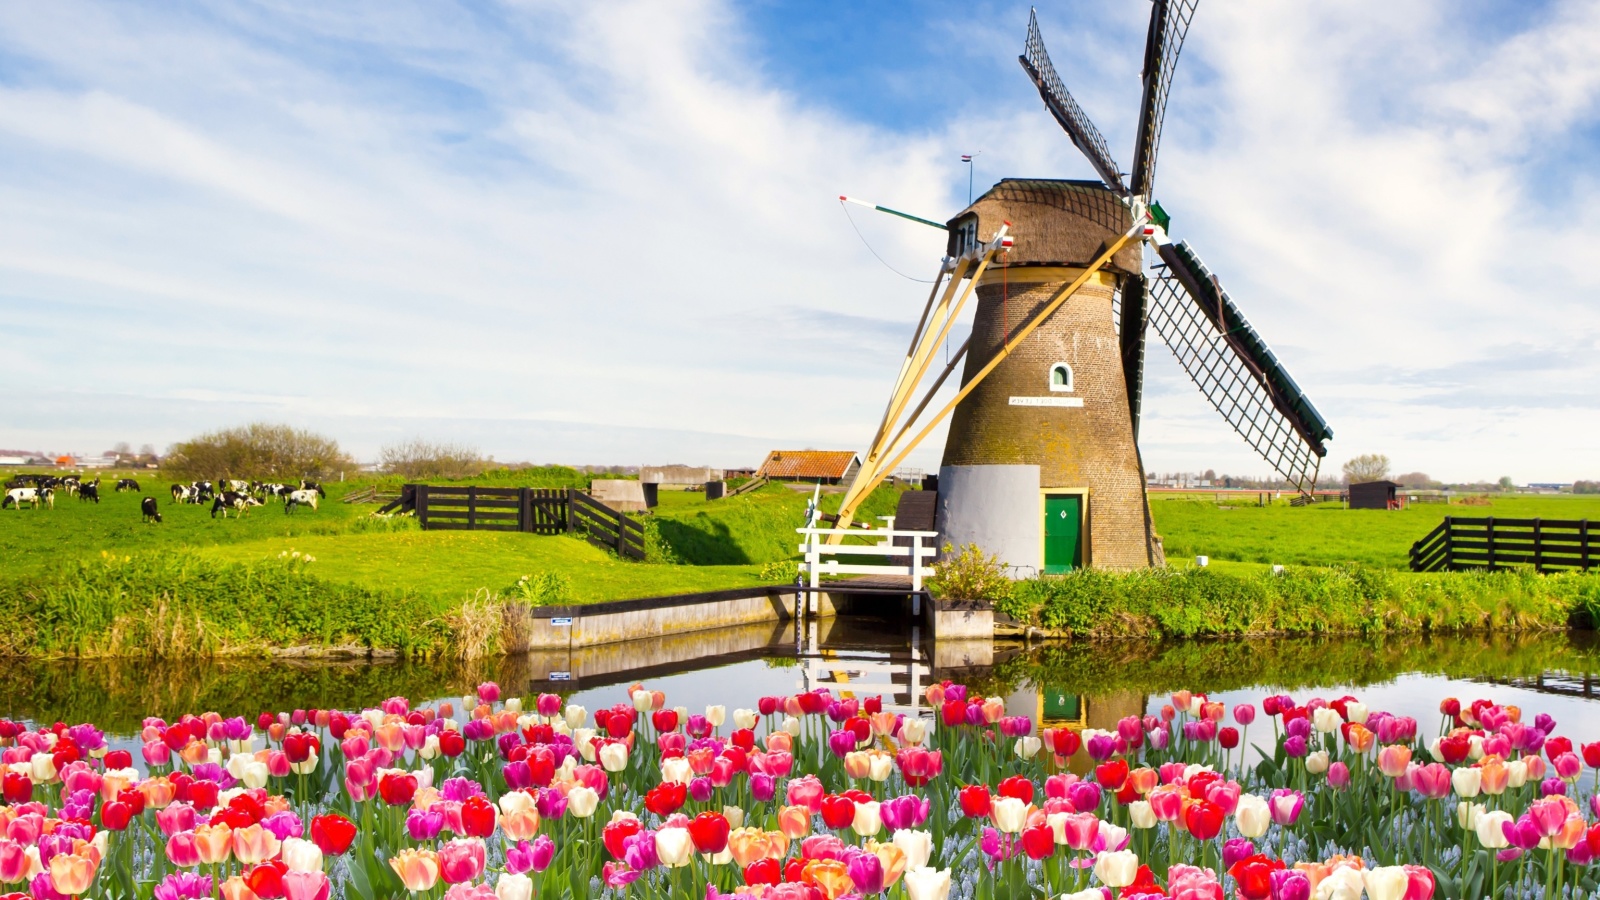 Mill and tulips in Holland screenshot #1 1600x900